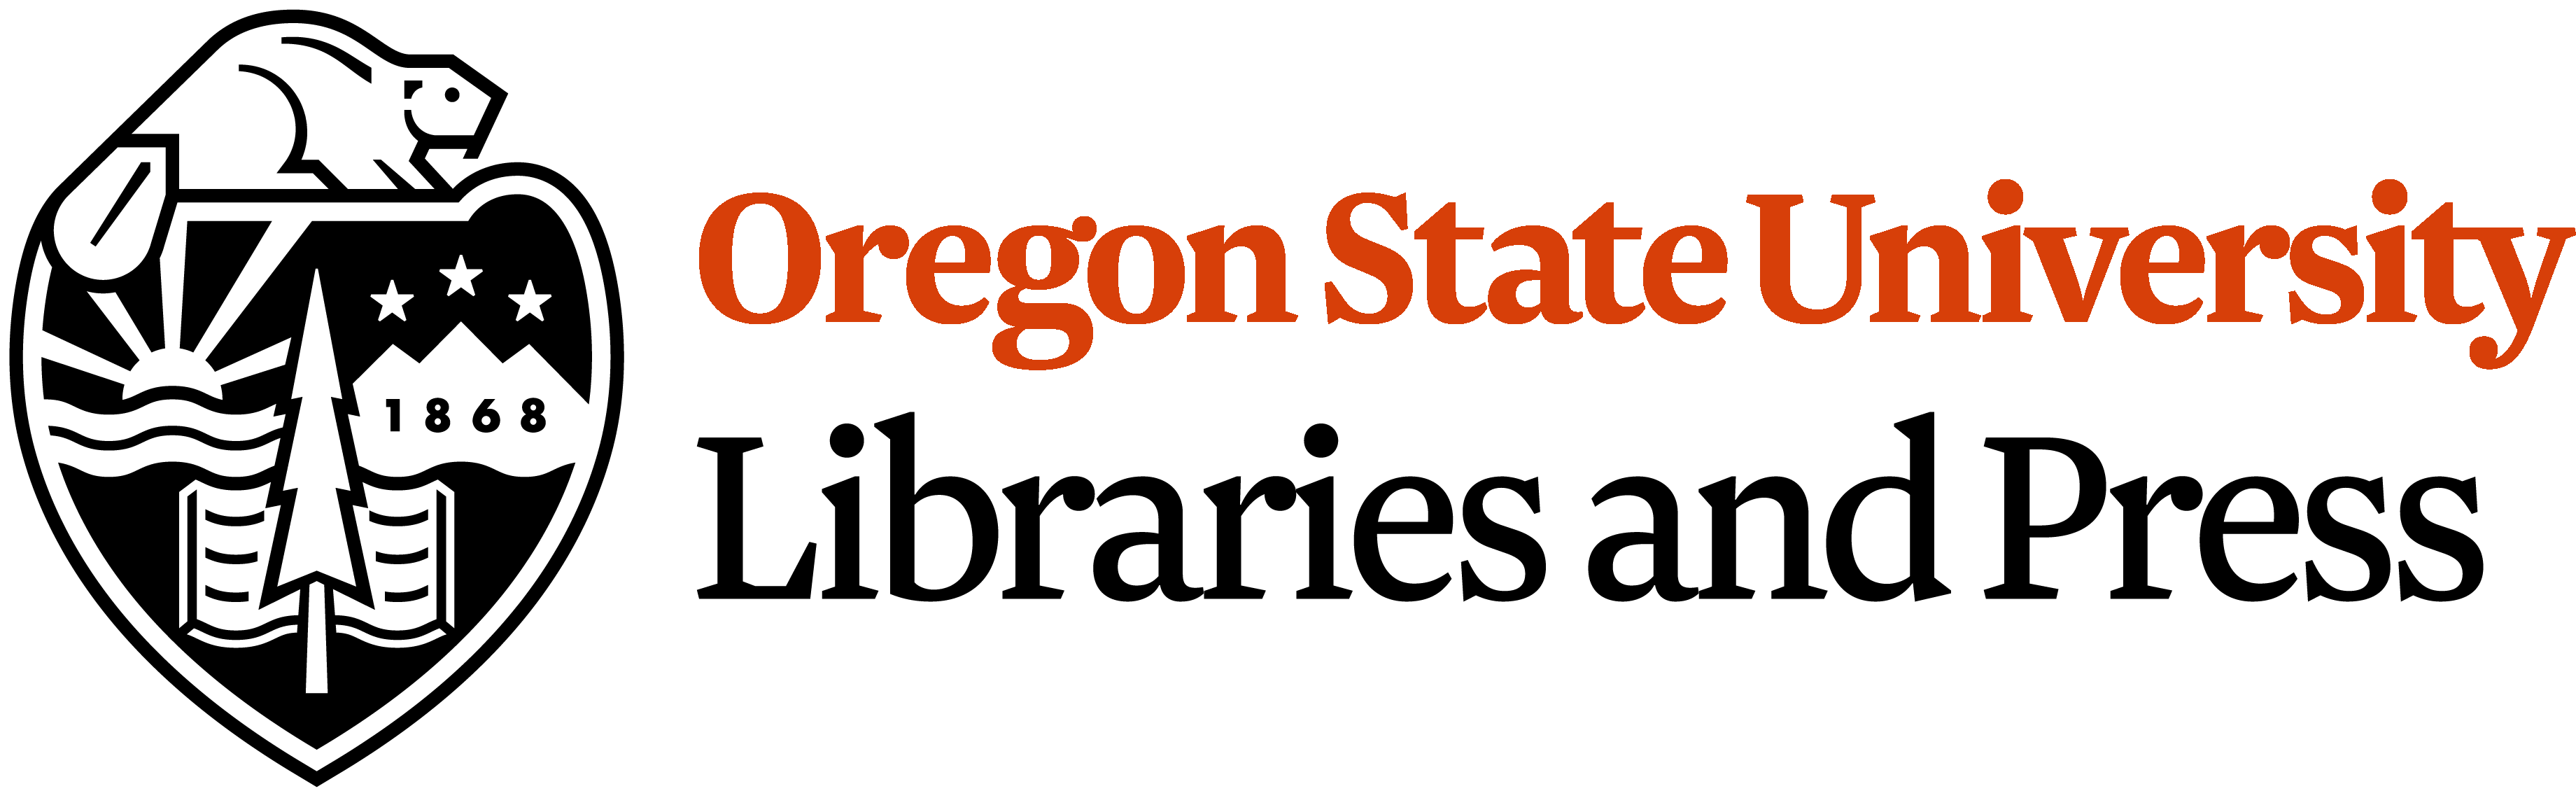 Work provided by Oregon State University